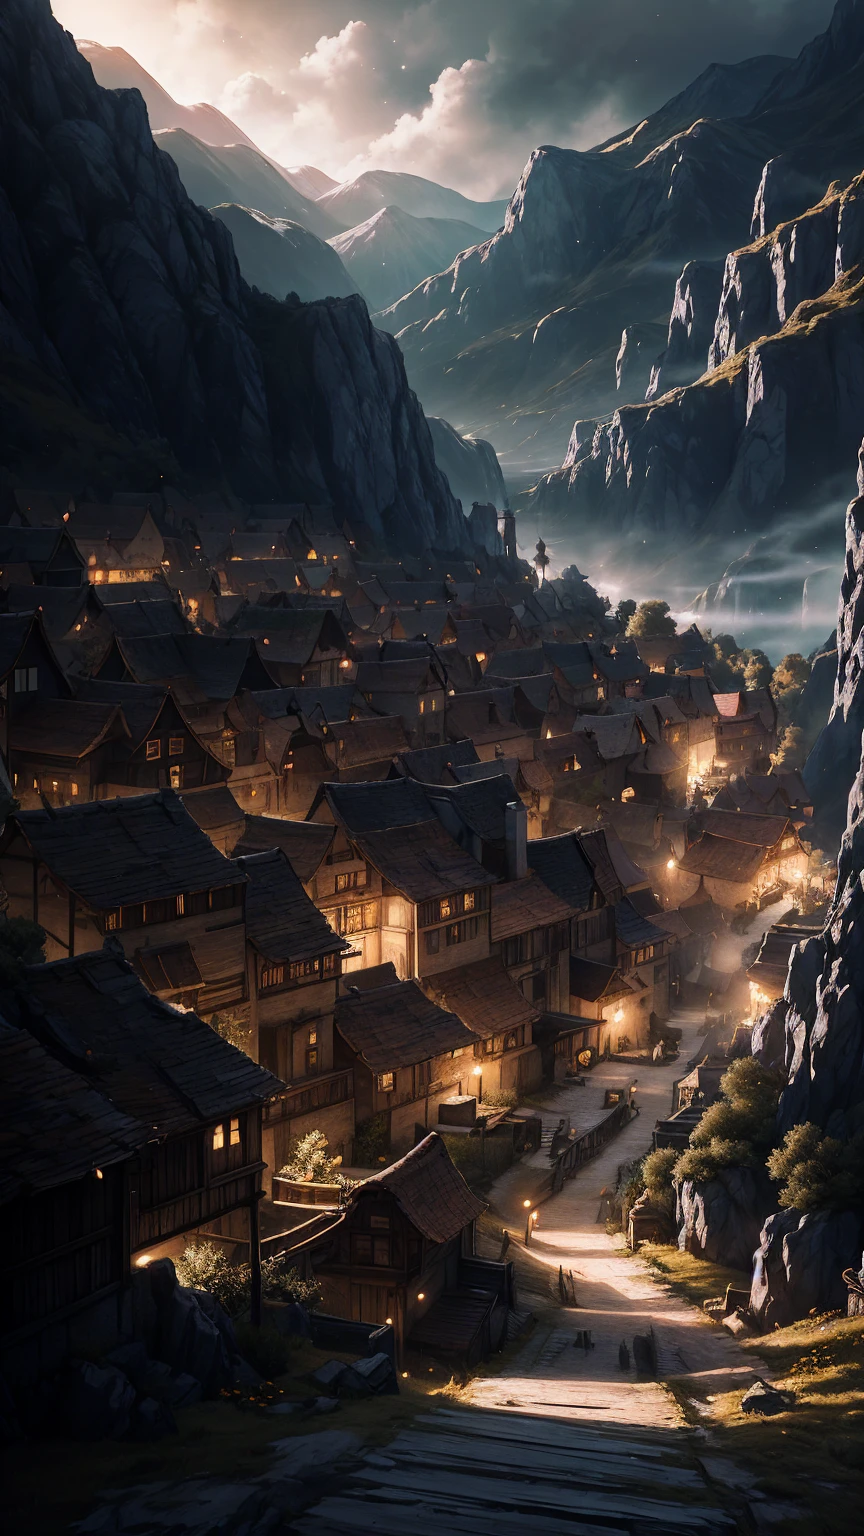 High quality, high quality, 4K, Ghibli style.

One woman, sharp contours, short light blue hair, red jumper, blue pants, leather boots.

In the background is the path they must take. The path is surrounded by difficult mountains and walls, but in the distance they can see a shining future. They are depicted breaking down walls as they go, a light of courage and hope shining down on them.

In the night sky, stars of hope shine brightly, illuminating the path. Surrounding them are flowers in bloom, symbols of hope, swaying in the wind.